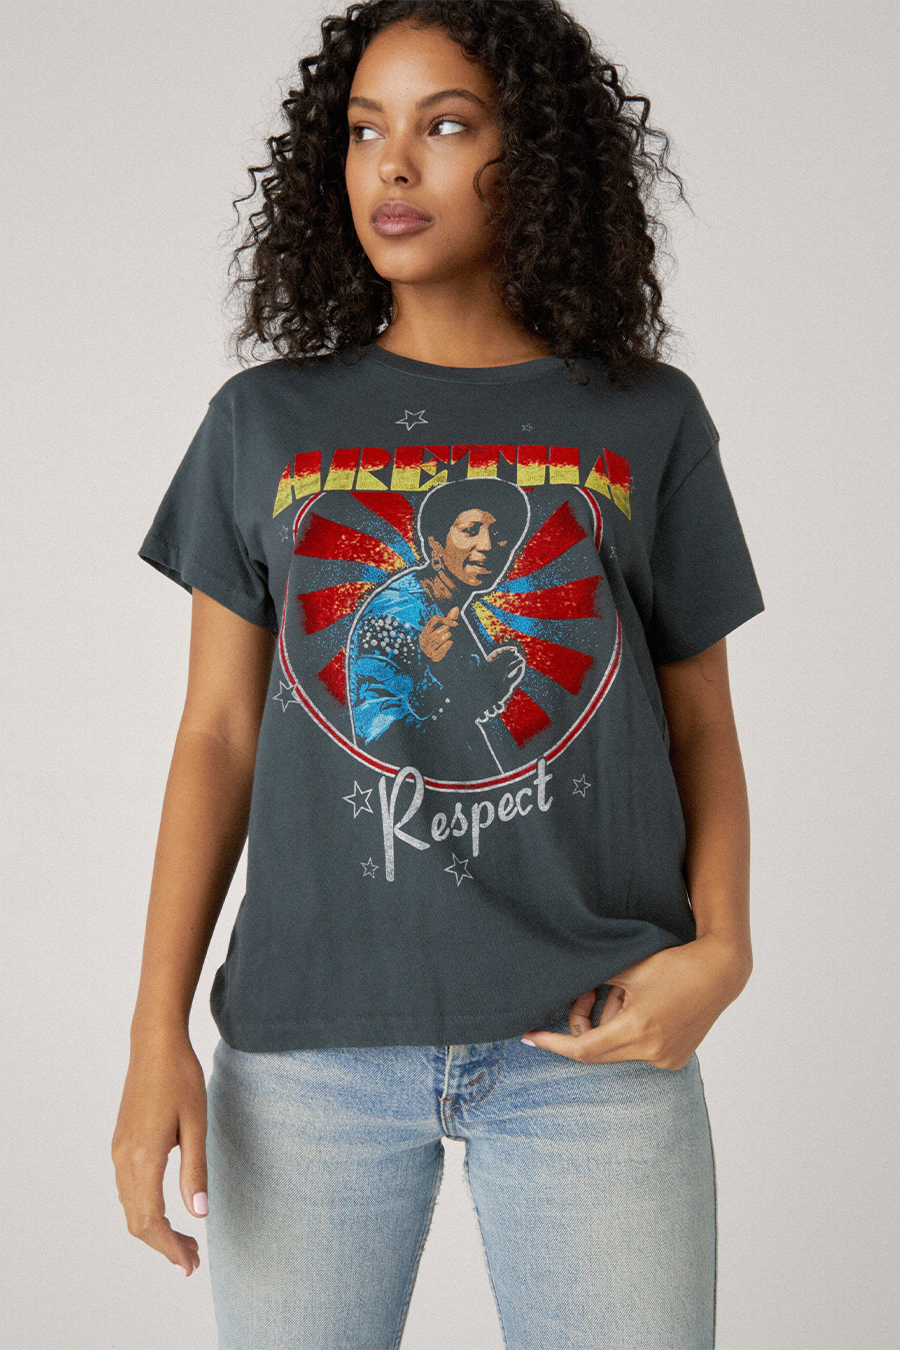 Aretha Respect Tour Tee | V Black - Main Image Number 1 of 2